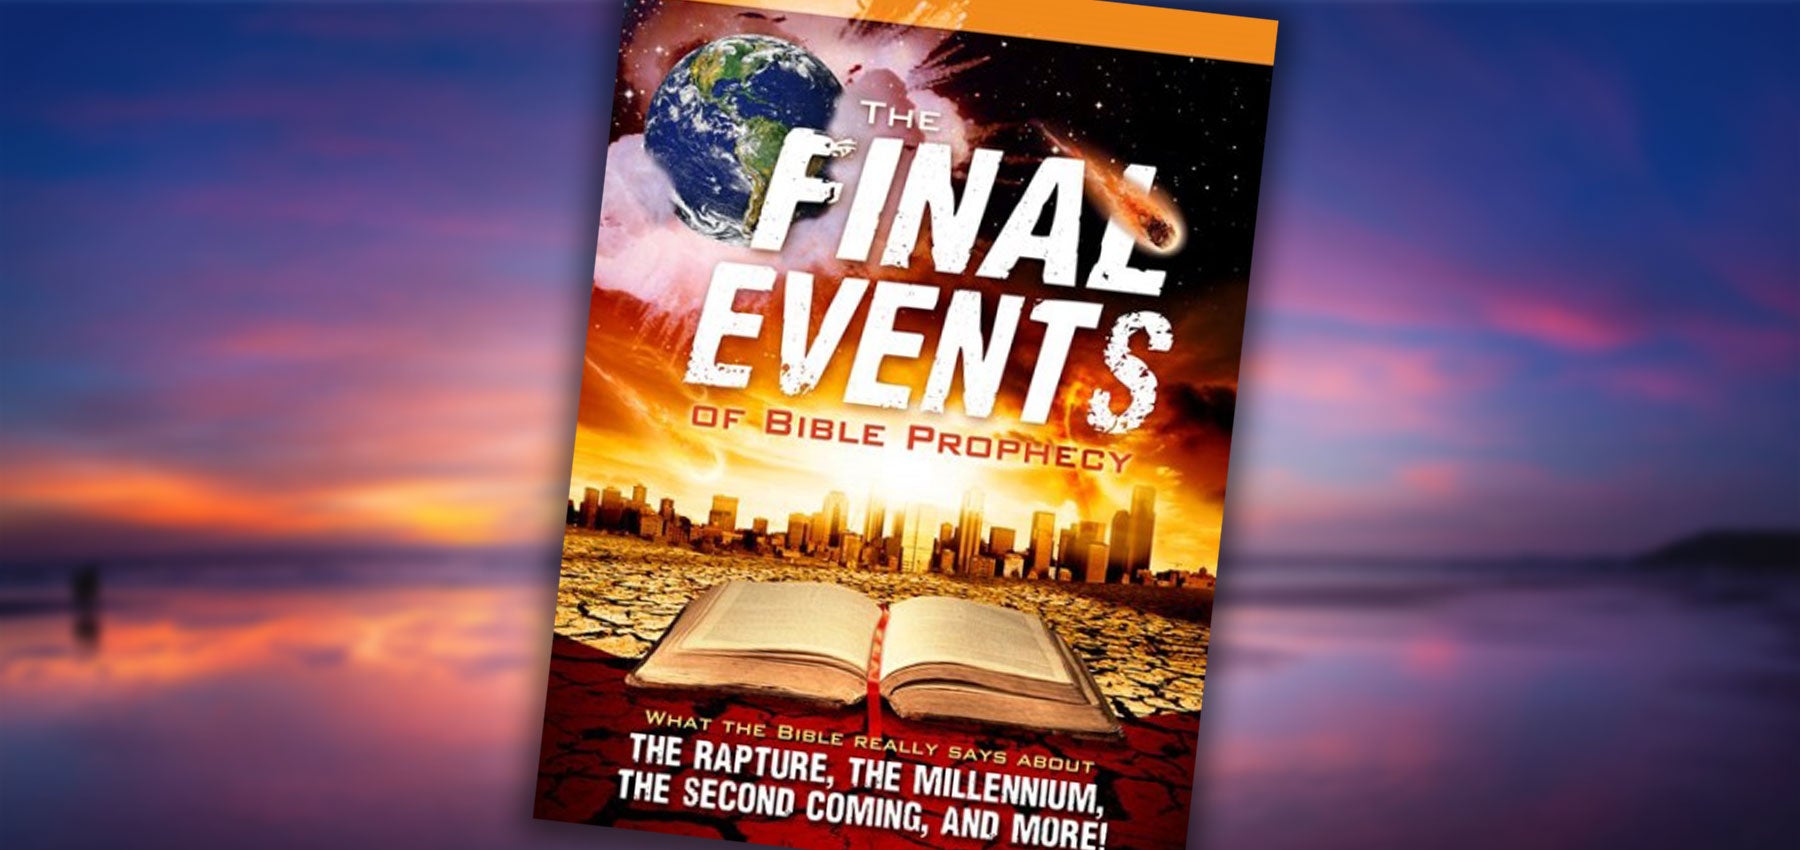 Final Events of Bible Prophecy DVD or Digital Download Free Offer